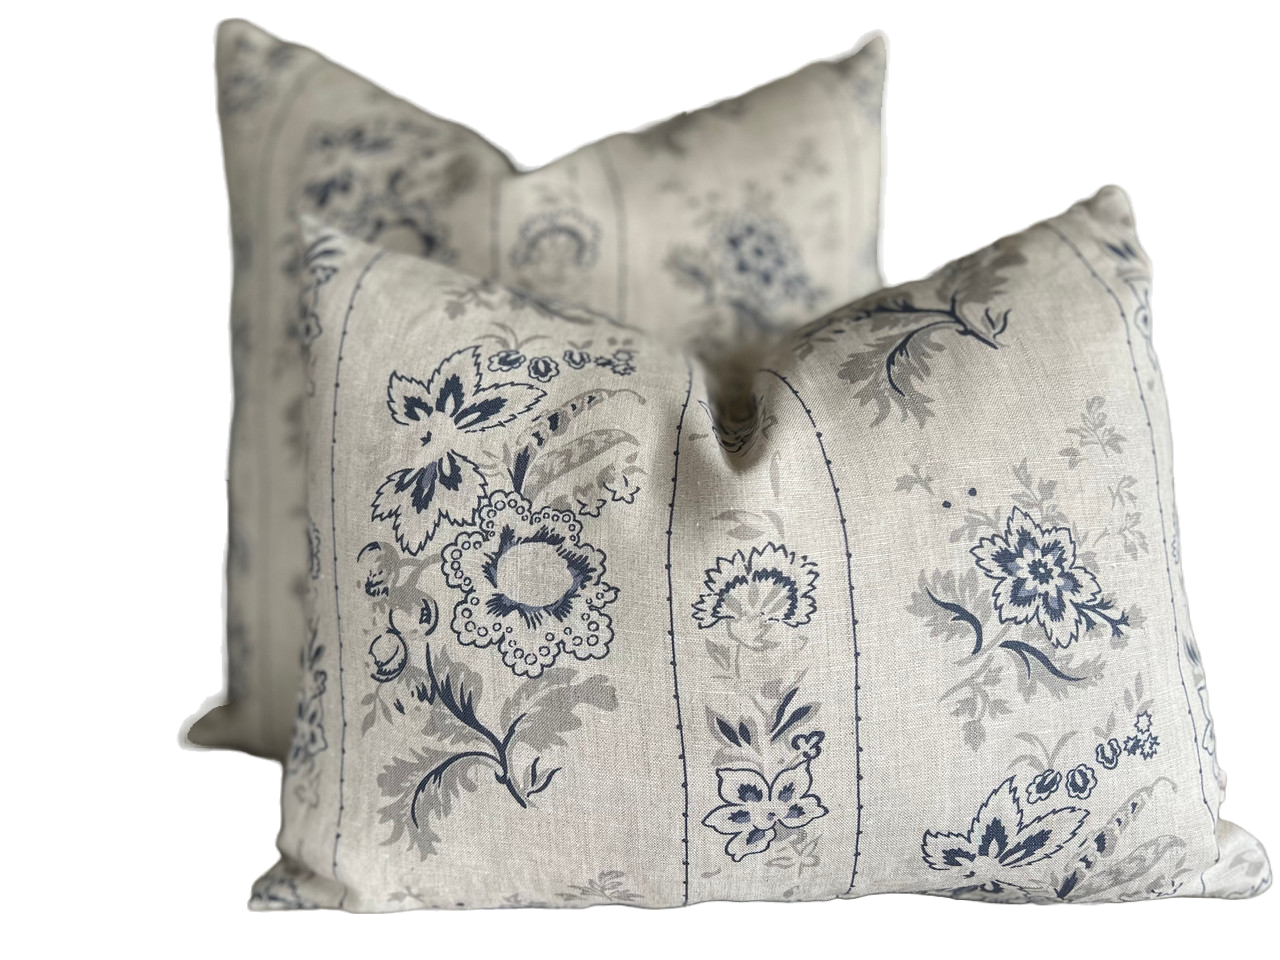 Cabbages and Roses India Rose Blue Shabby Chic Vintage Cushion Cover